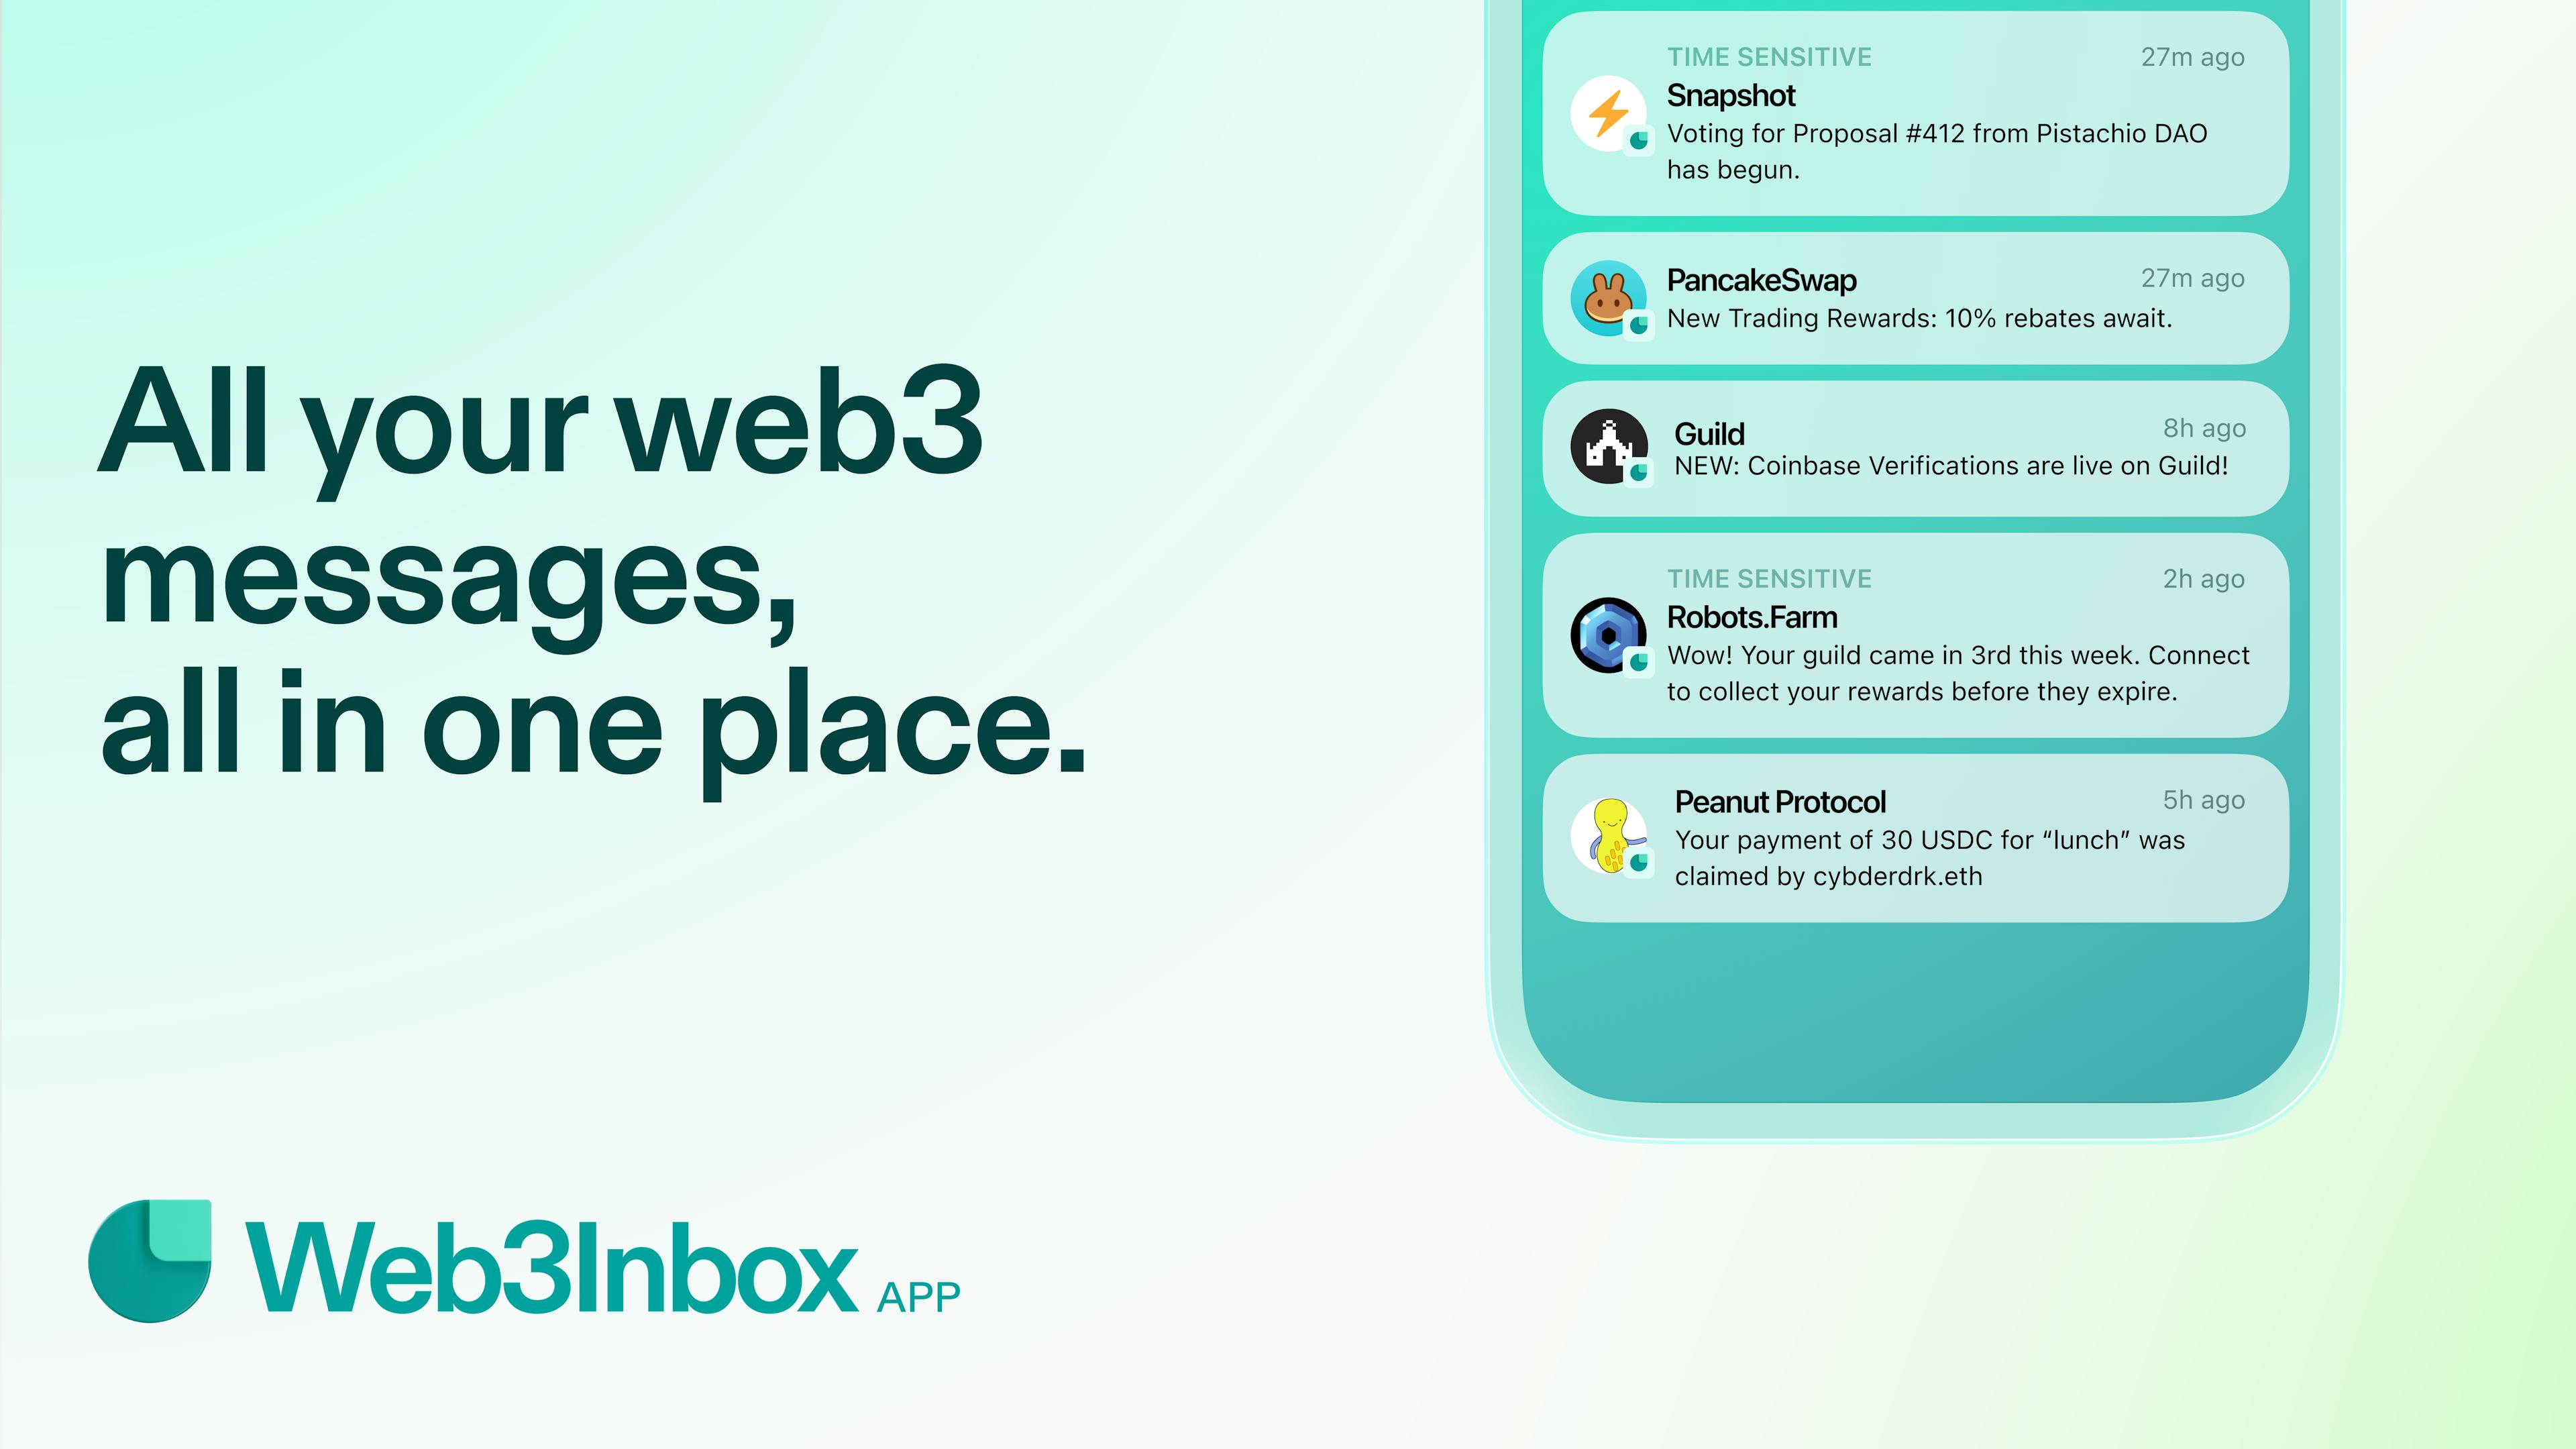 A Web3Inbox promo with push notifications from web3 apps